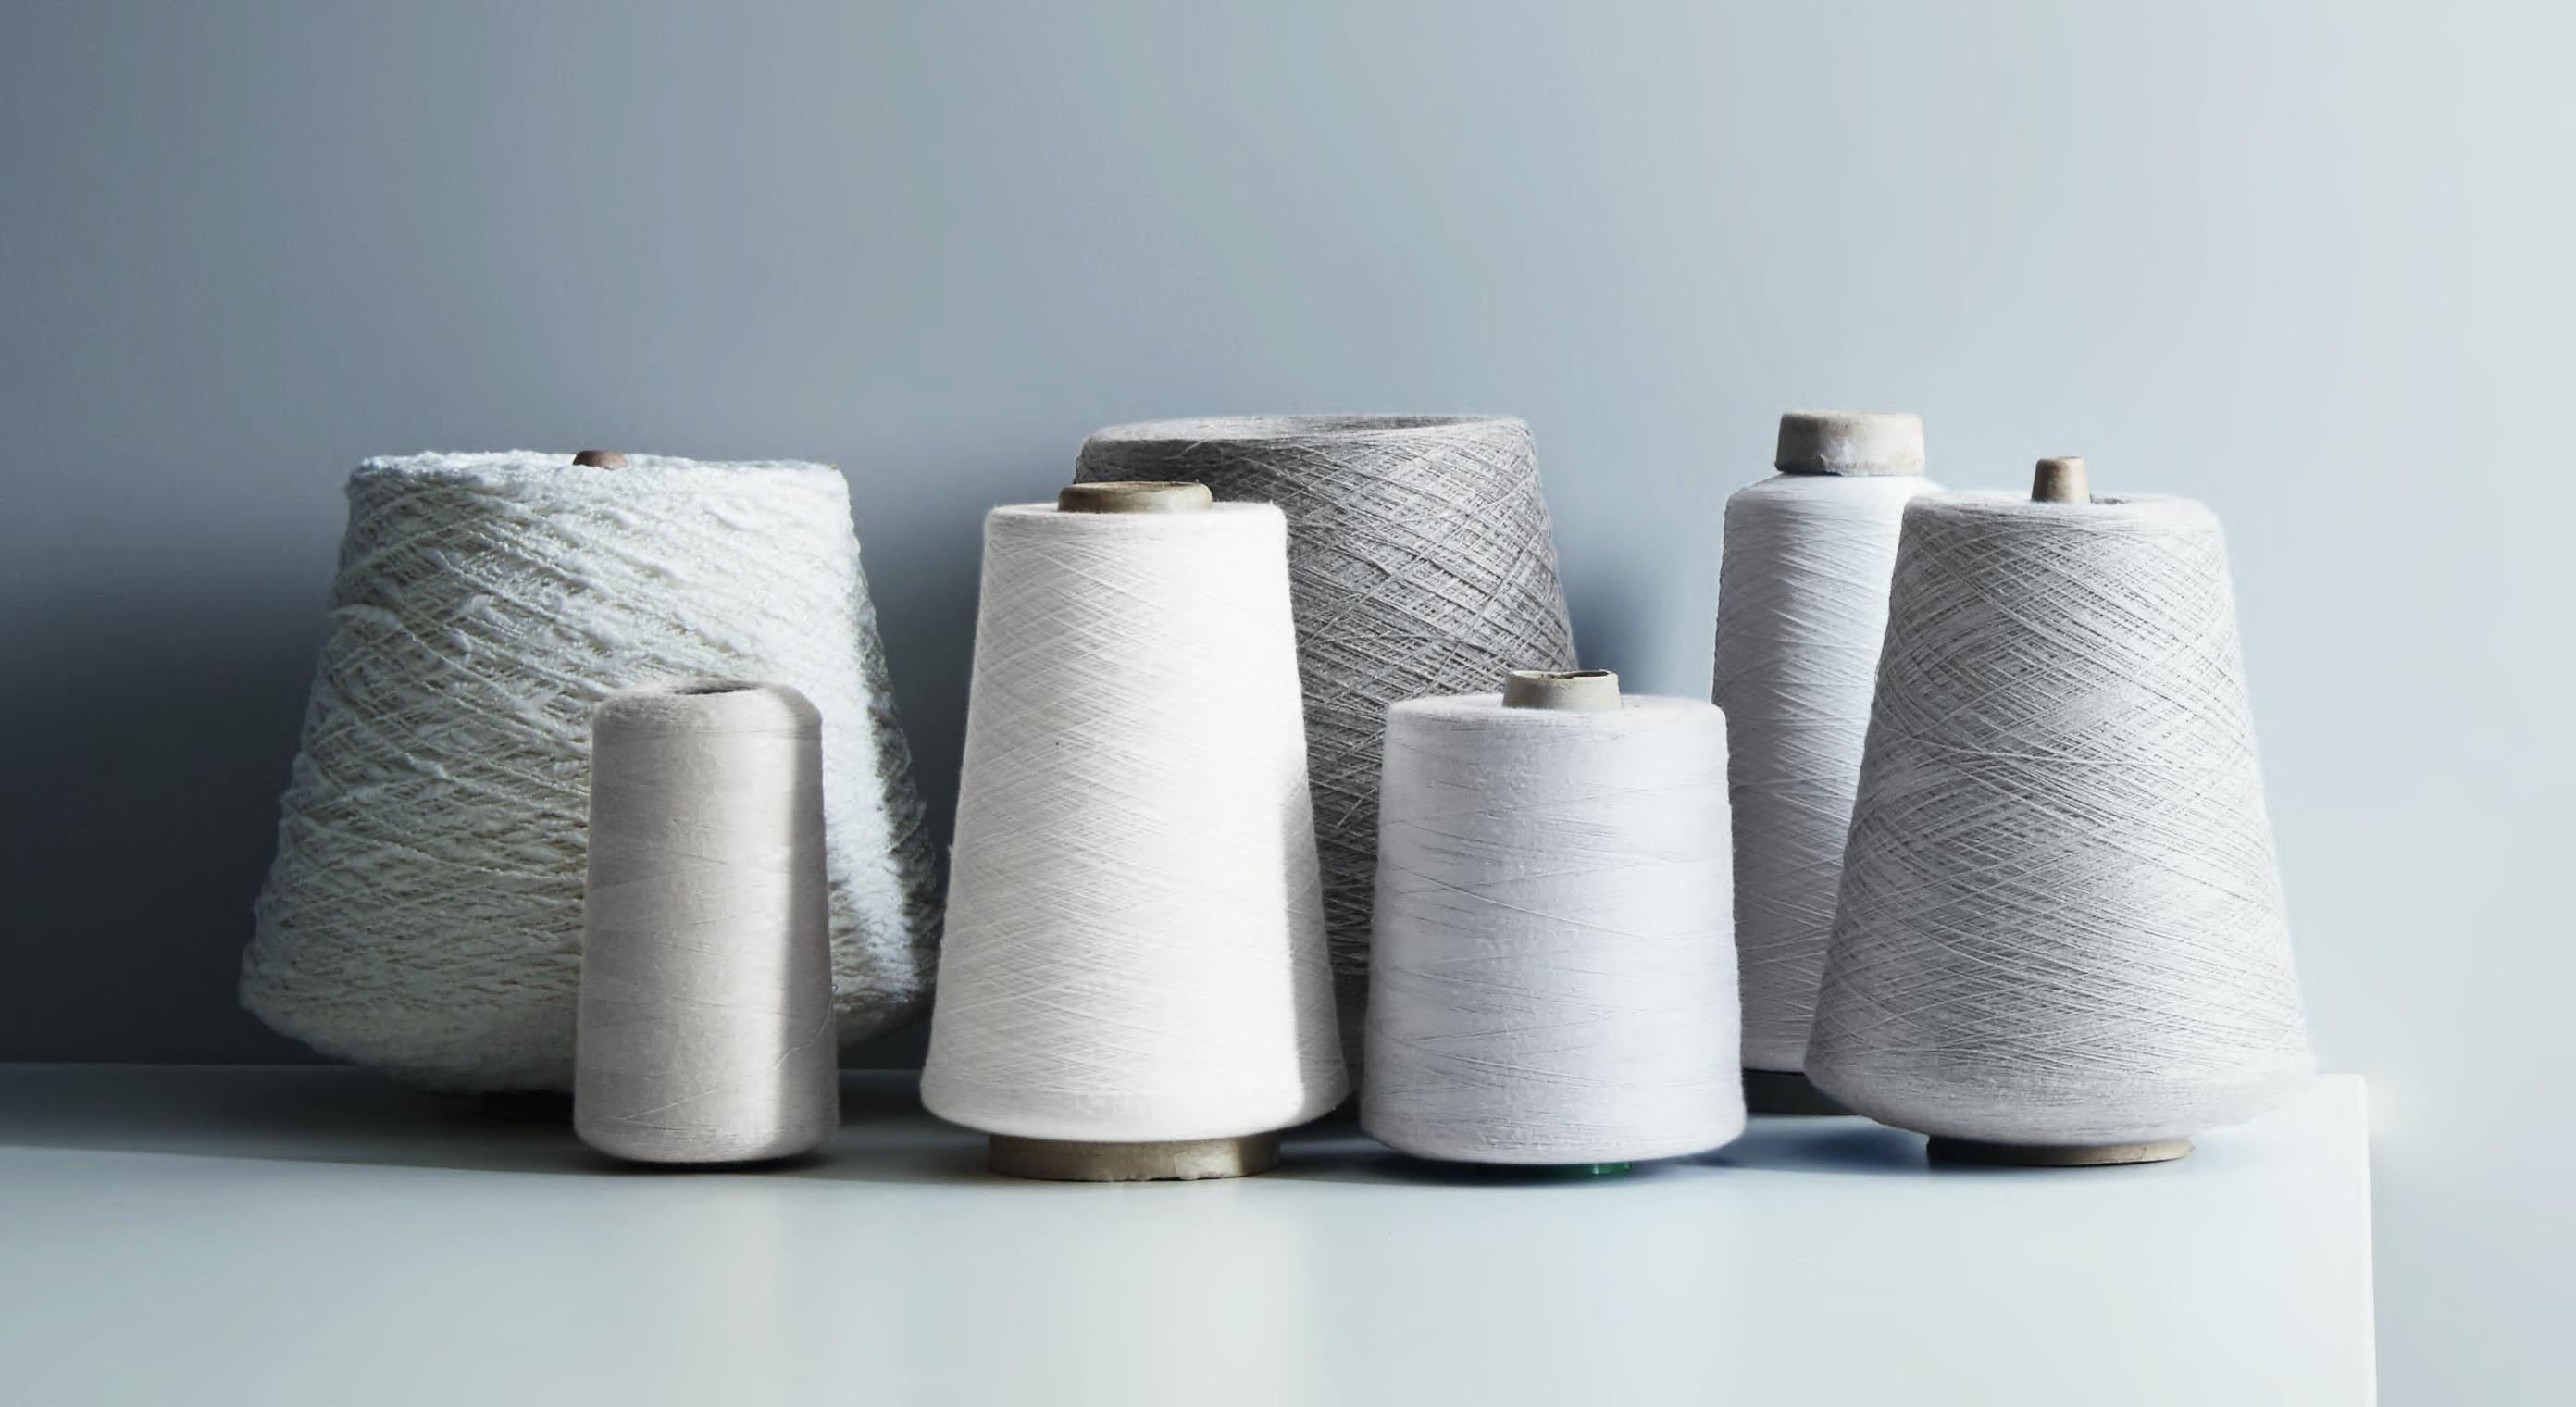 A collection of spools of thread, all different sizes in neutral grey shades